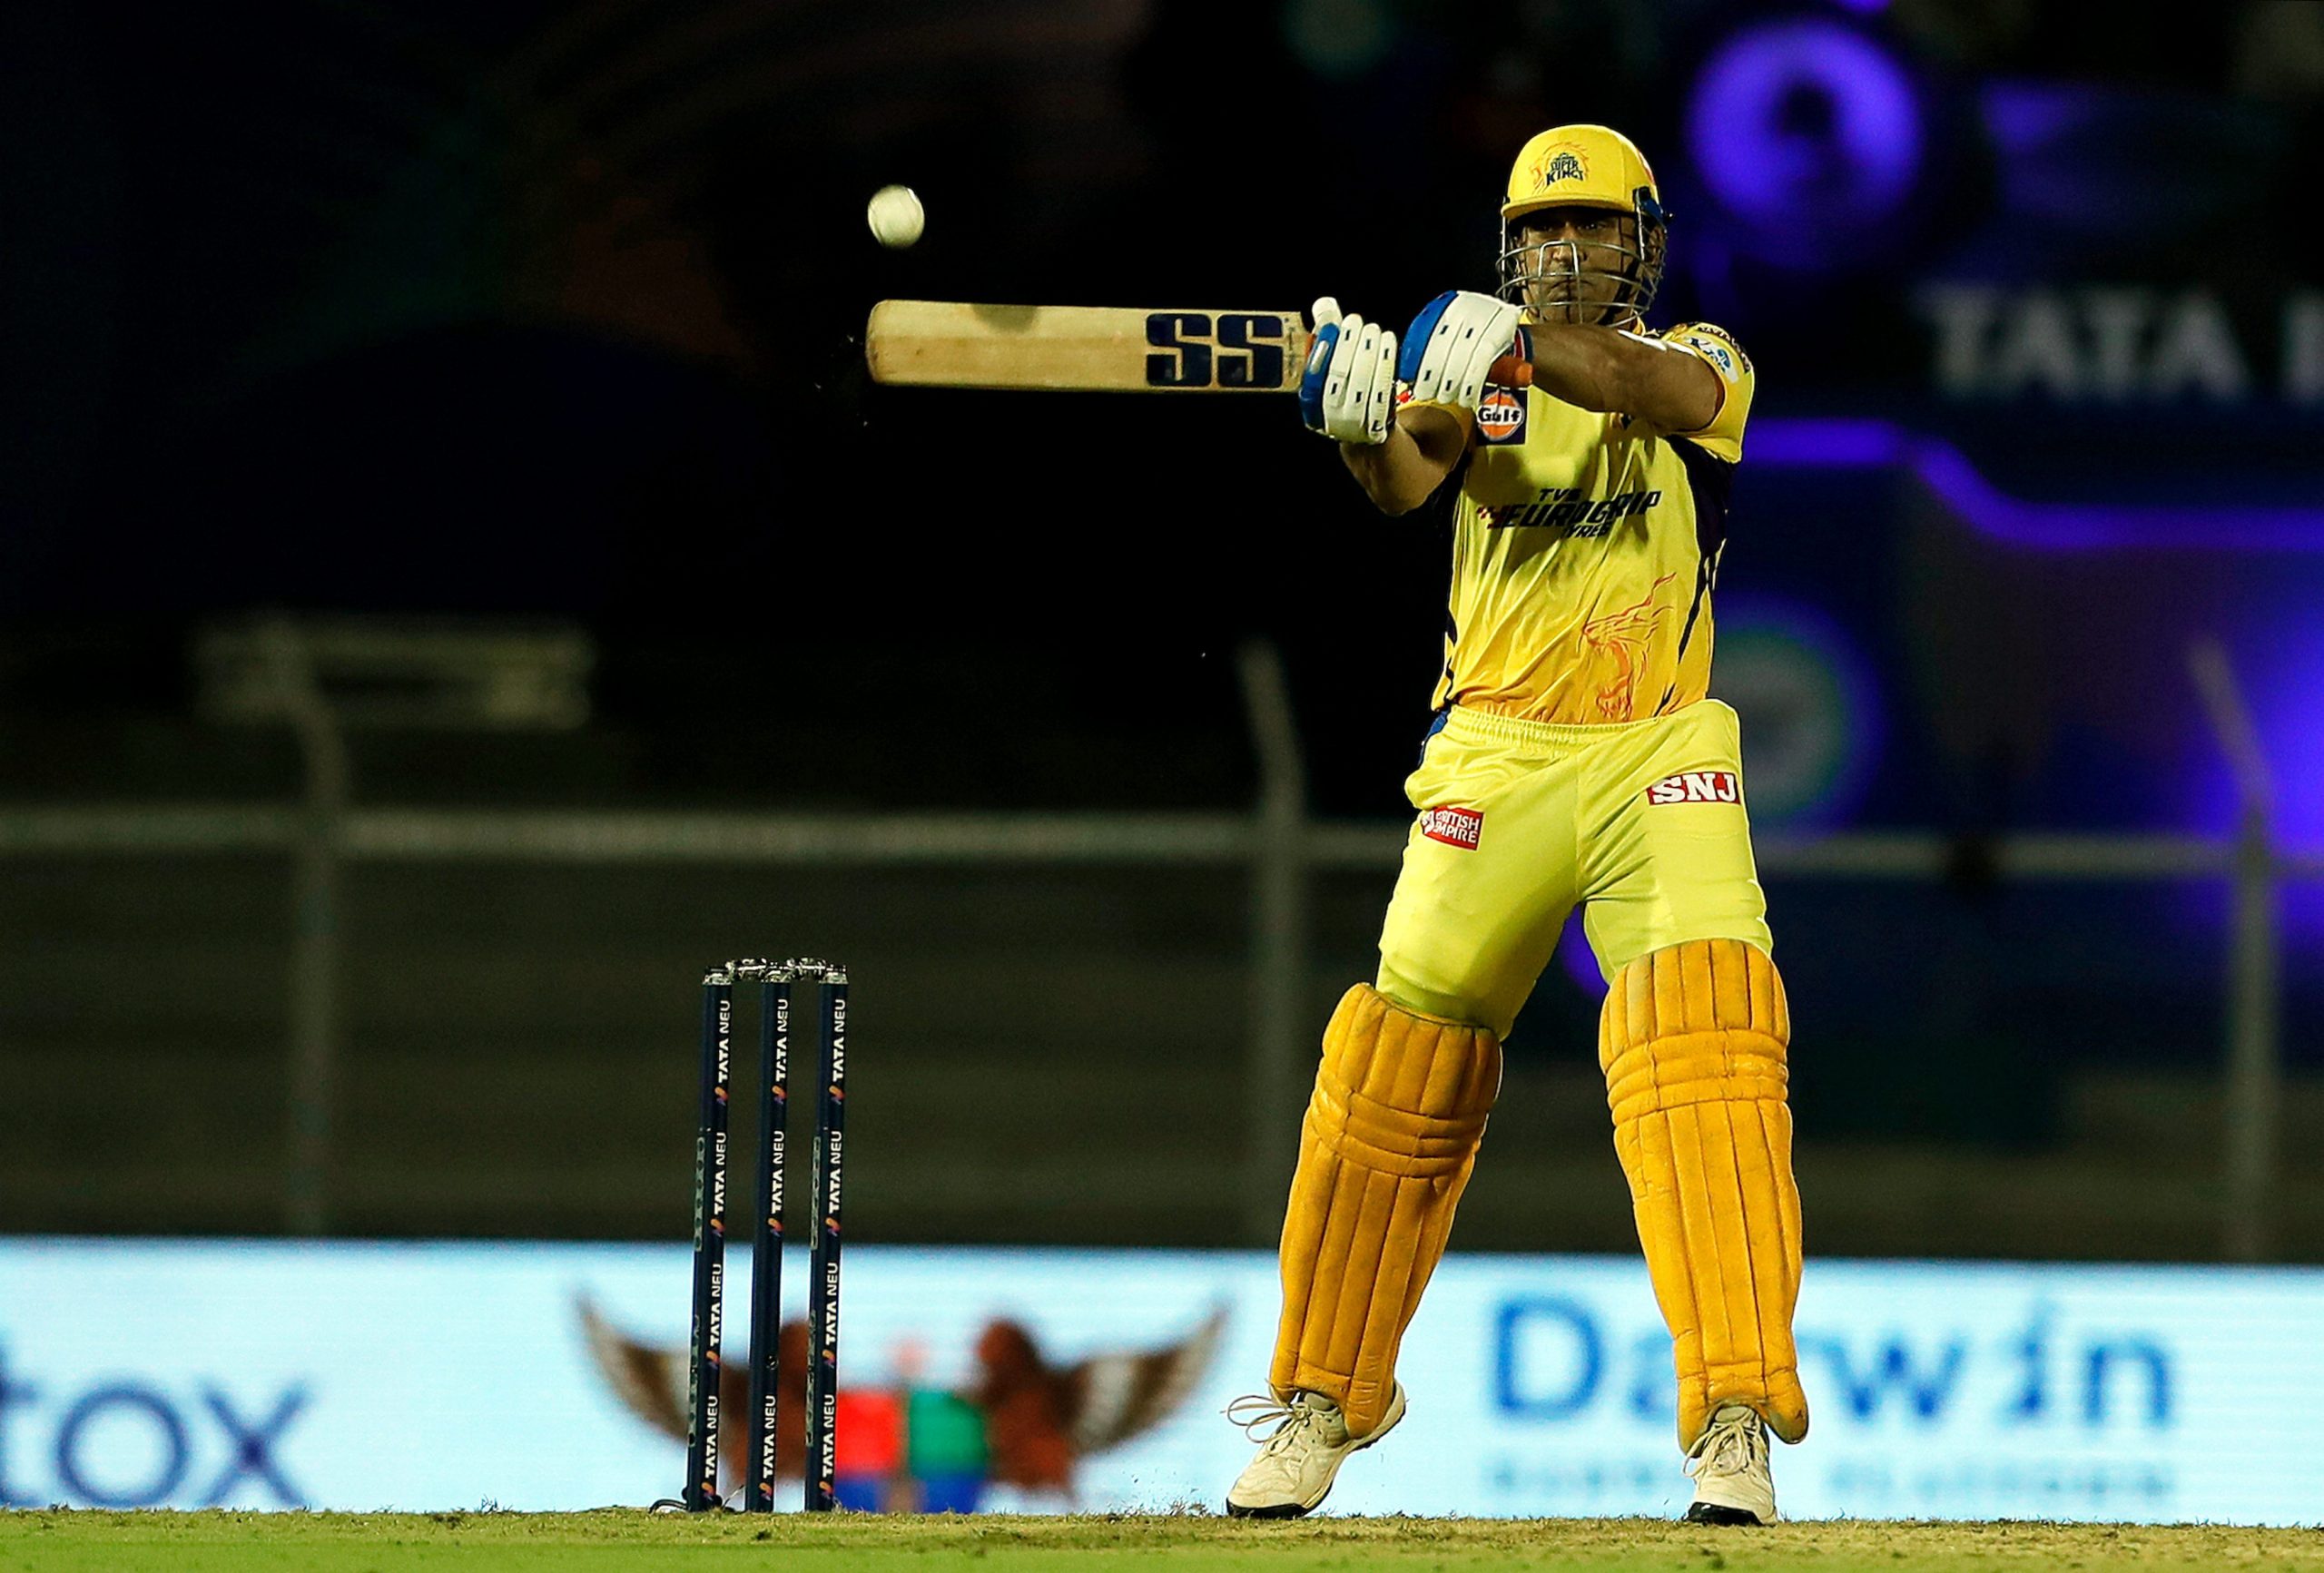 MS Dhoni achieves huge T20 feat, shy of Rohit Sharma’s record